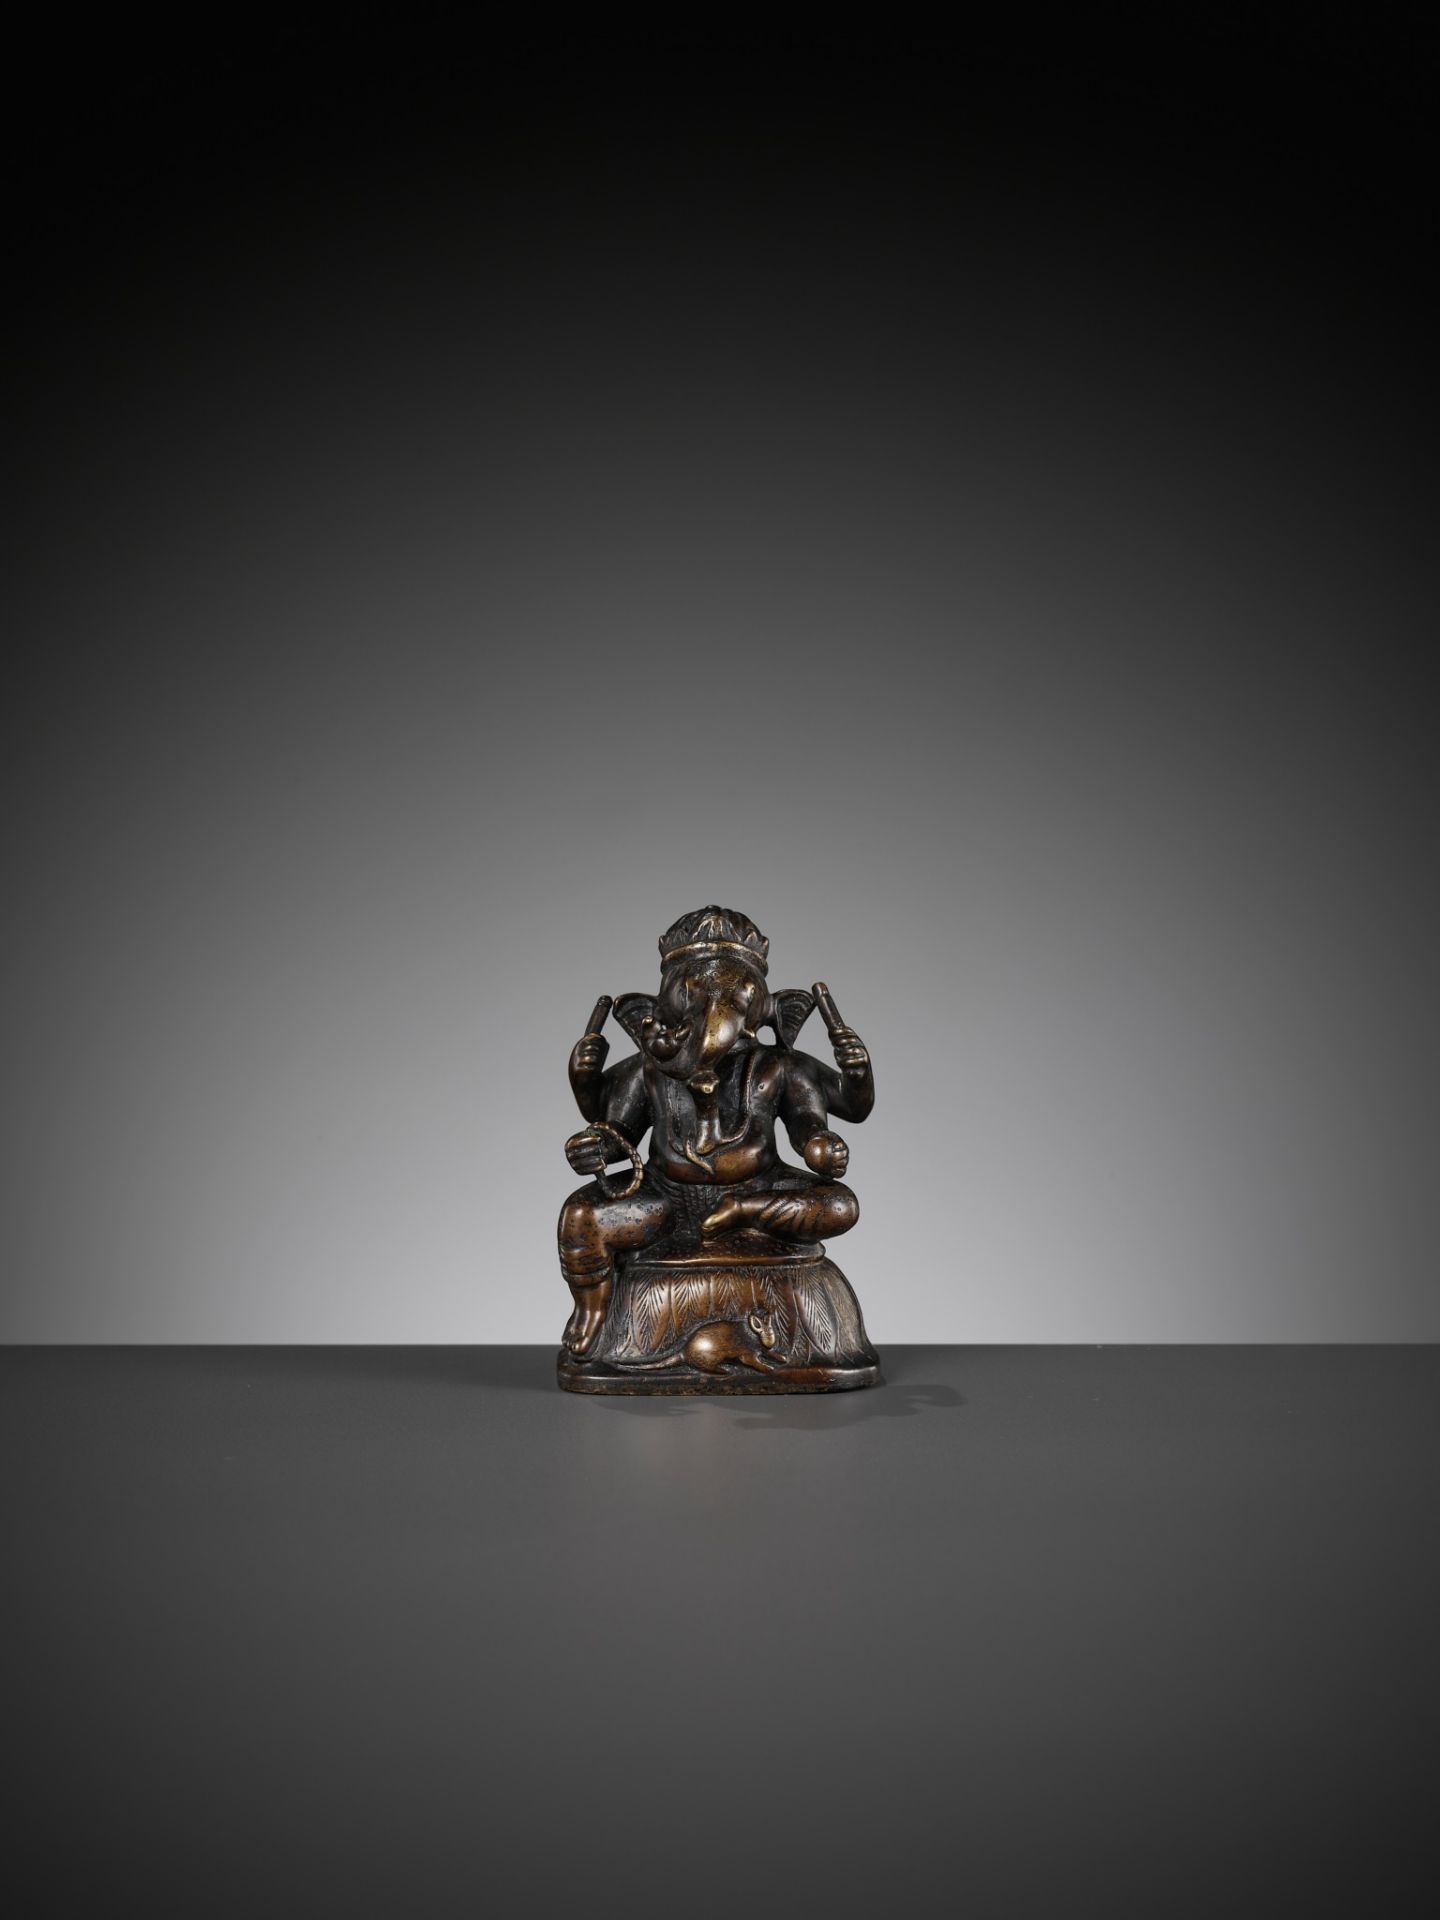 A SMALL BRONZE FIGURE OF GANESHA, SOUTH INDIA, 17TH - 18TH CENTURY - Image 6 of 14